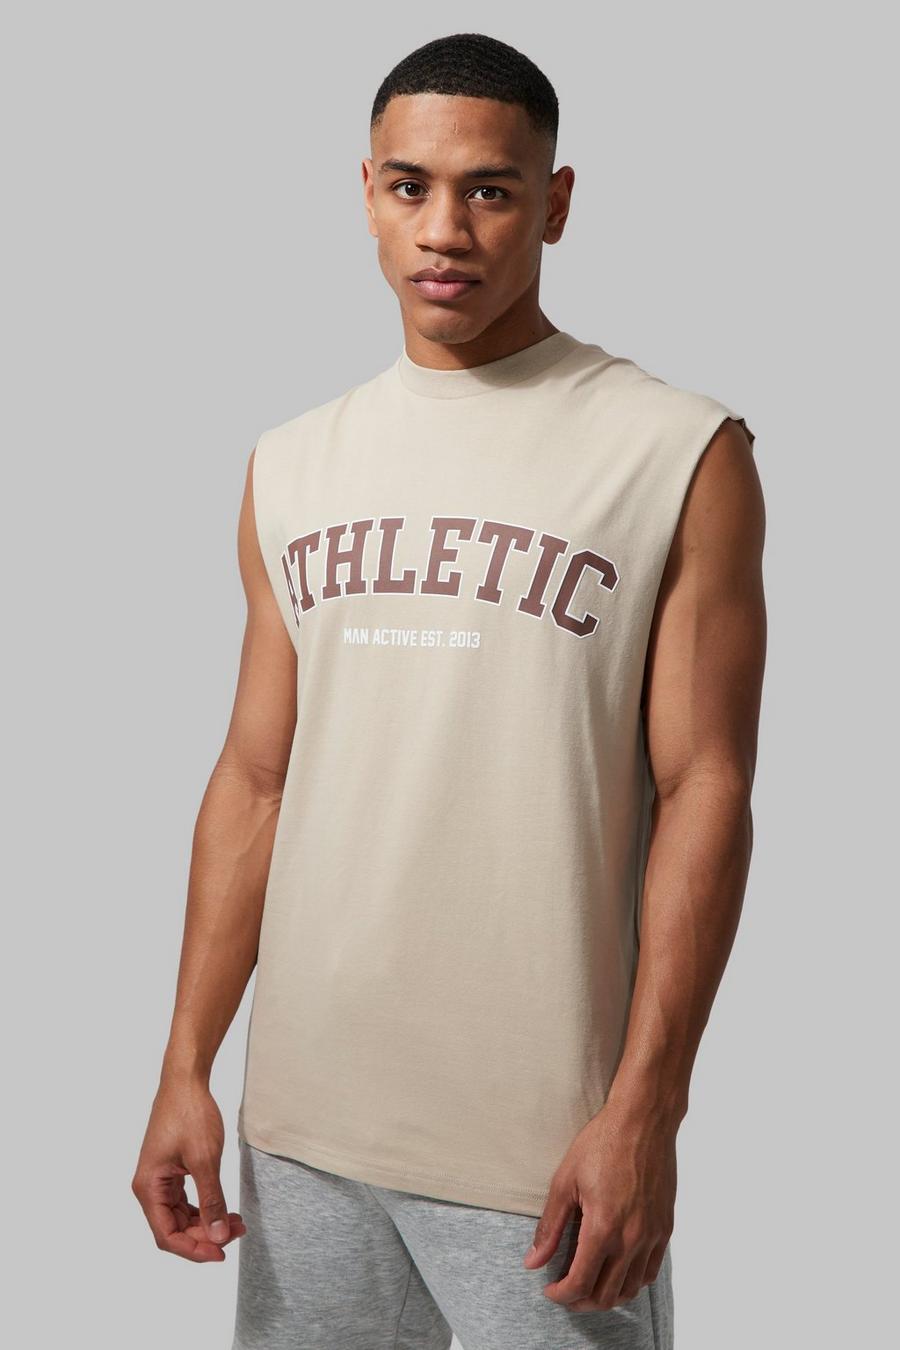 Sand beige Man Active Fitness Athletic Tank Top